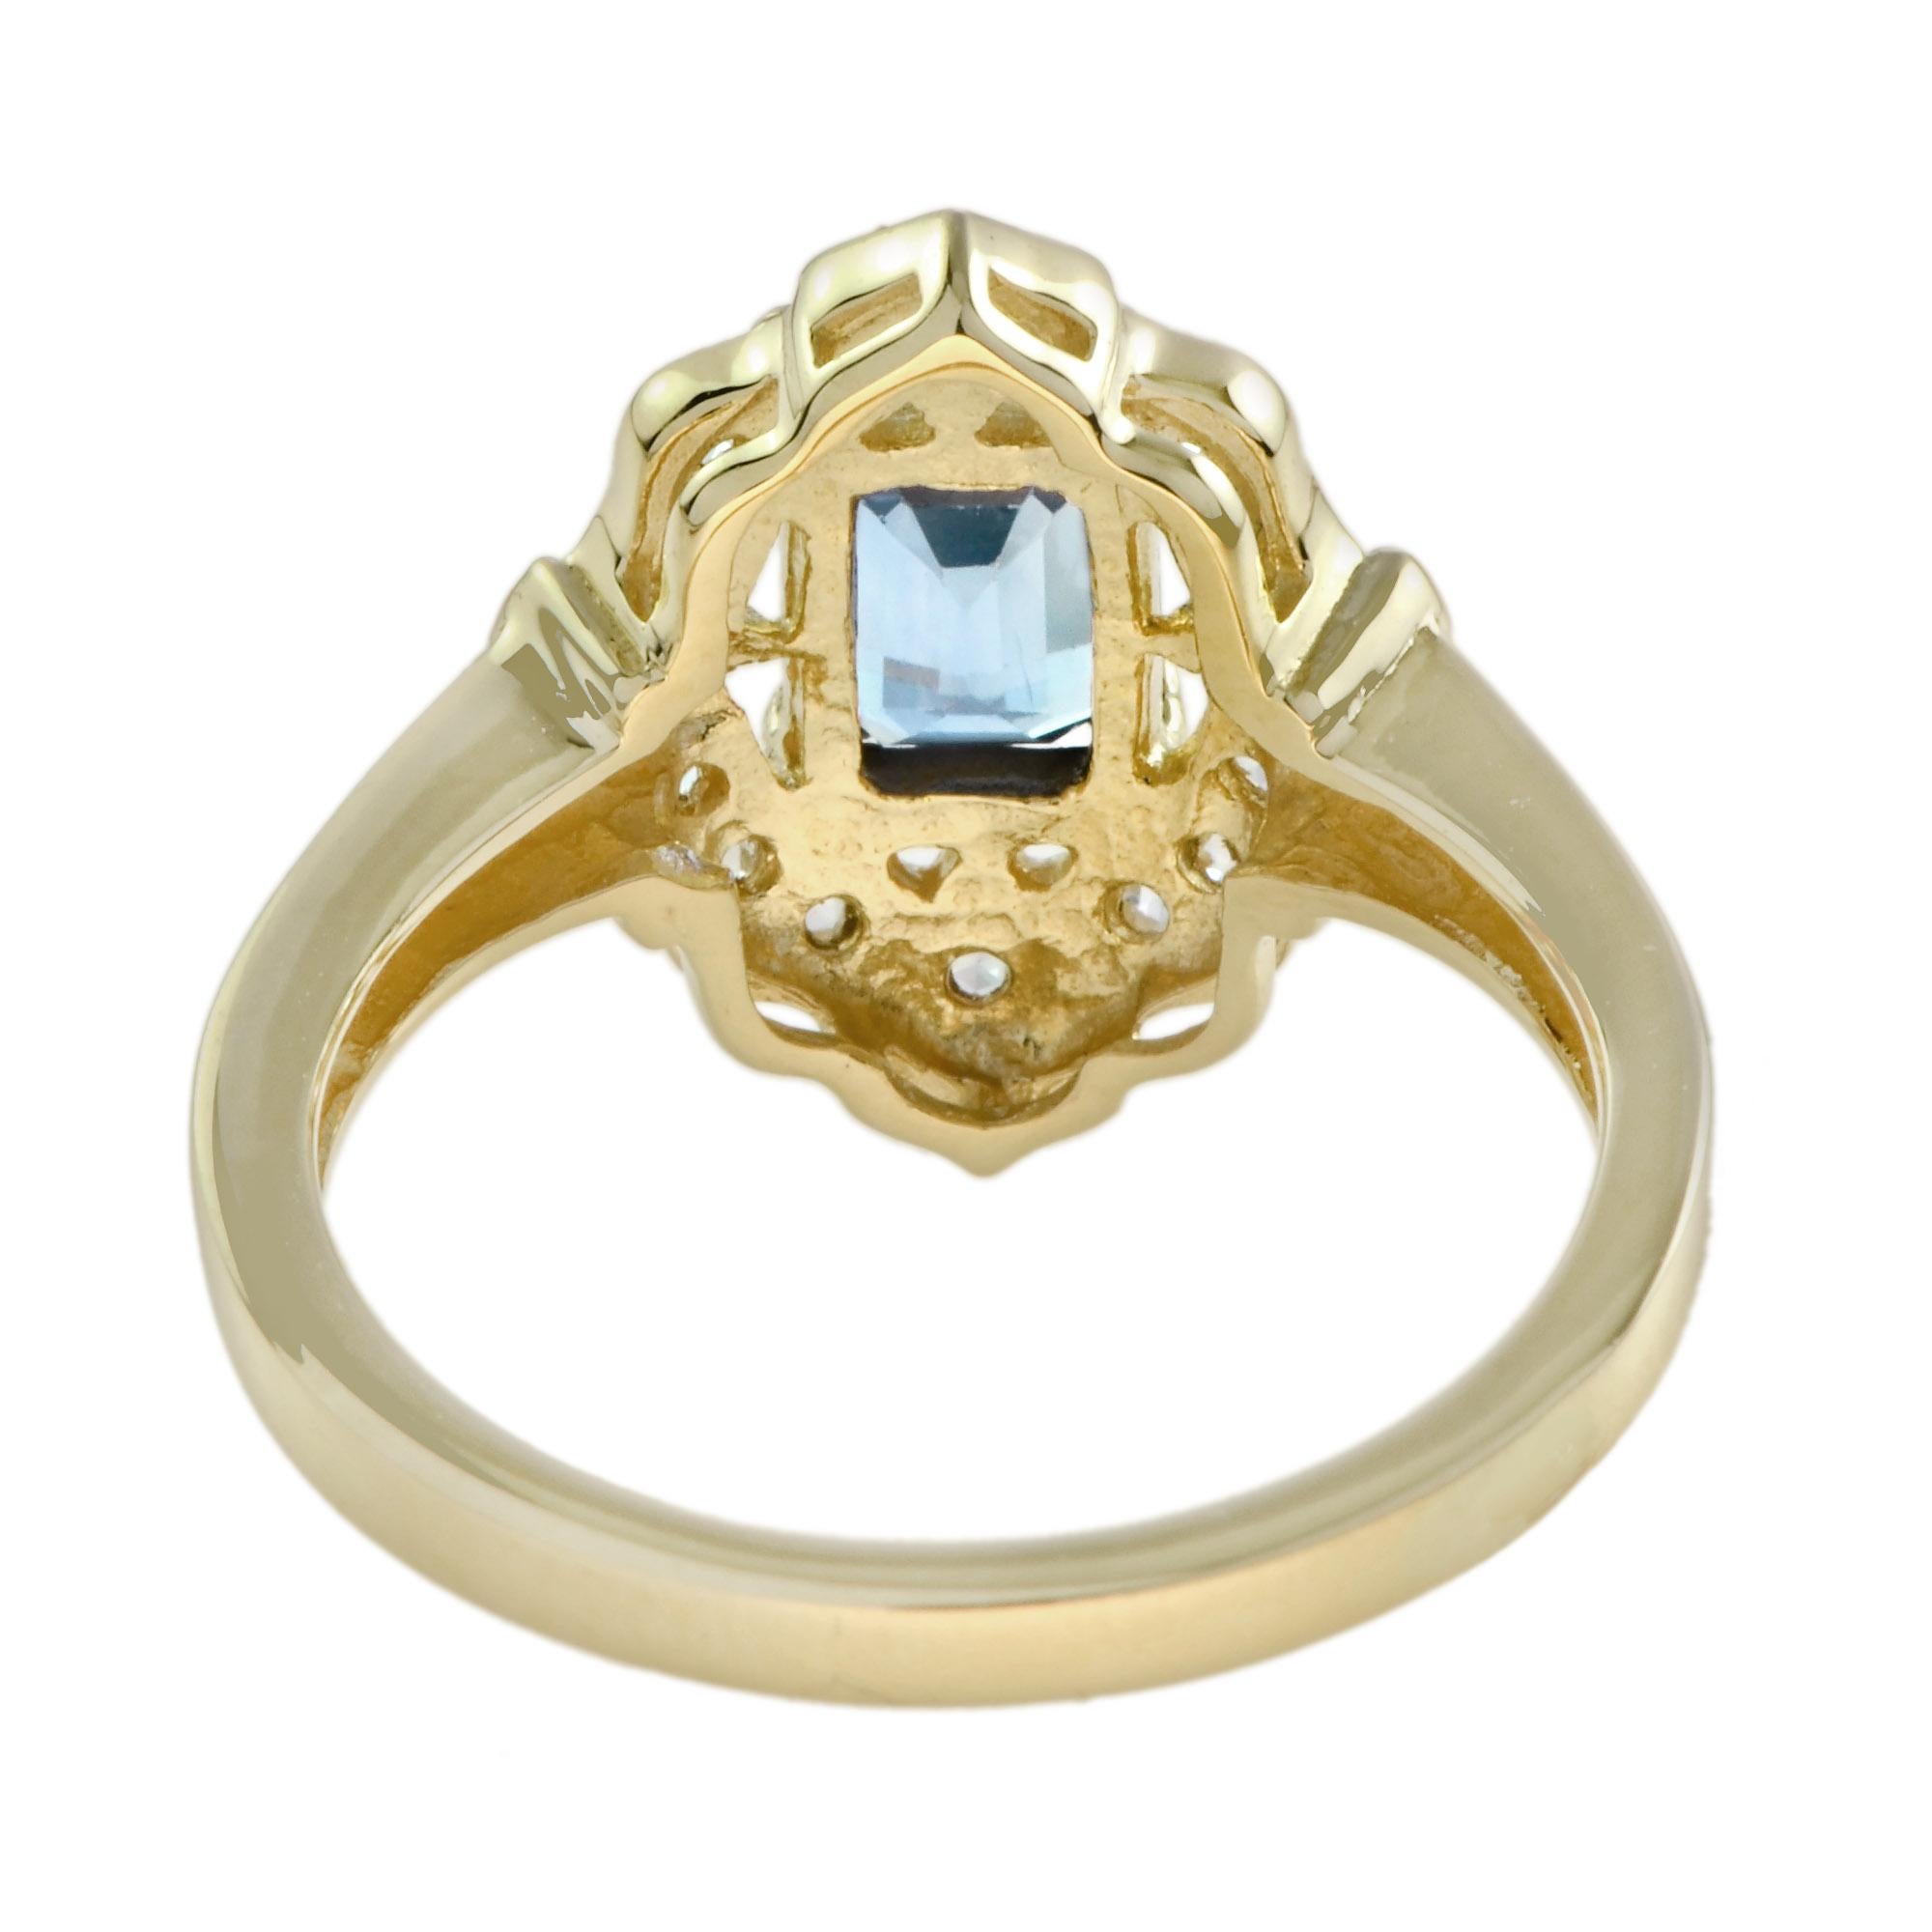 For Sale:  Emerald Cut Blue Topaz and Diamond Halo Vintage Style Ring in 14K Yellow Gold 2